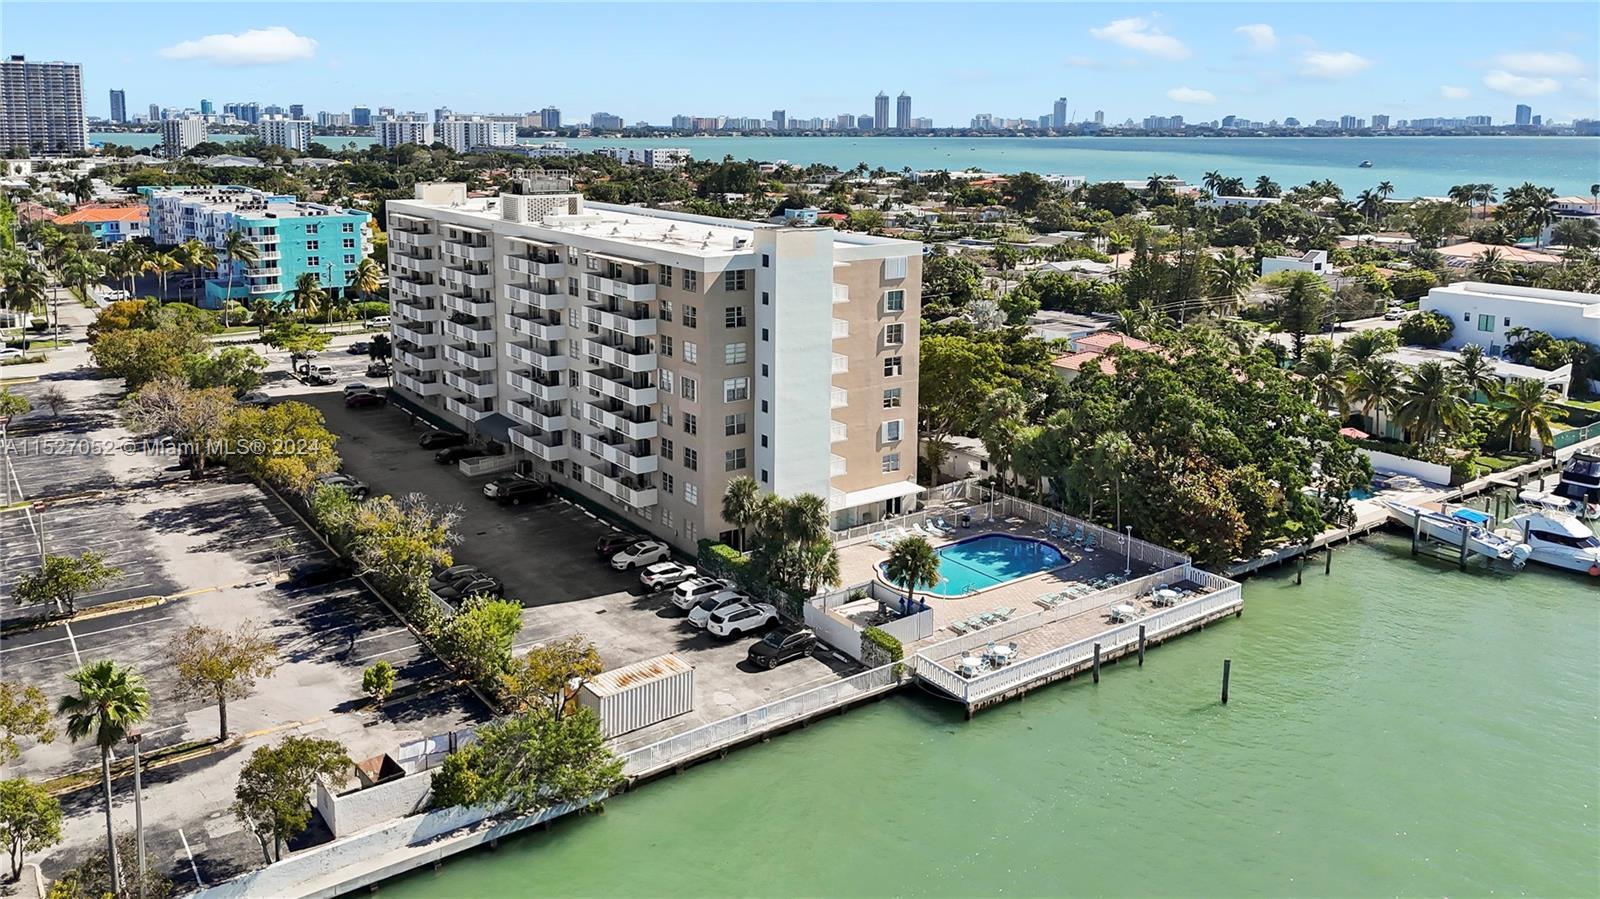 Most desired penthouse 1B/1.5B unit at Island Place with the best views of the bay, Downtown Miami, 